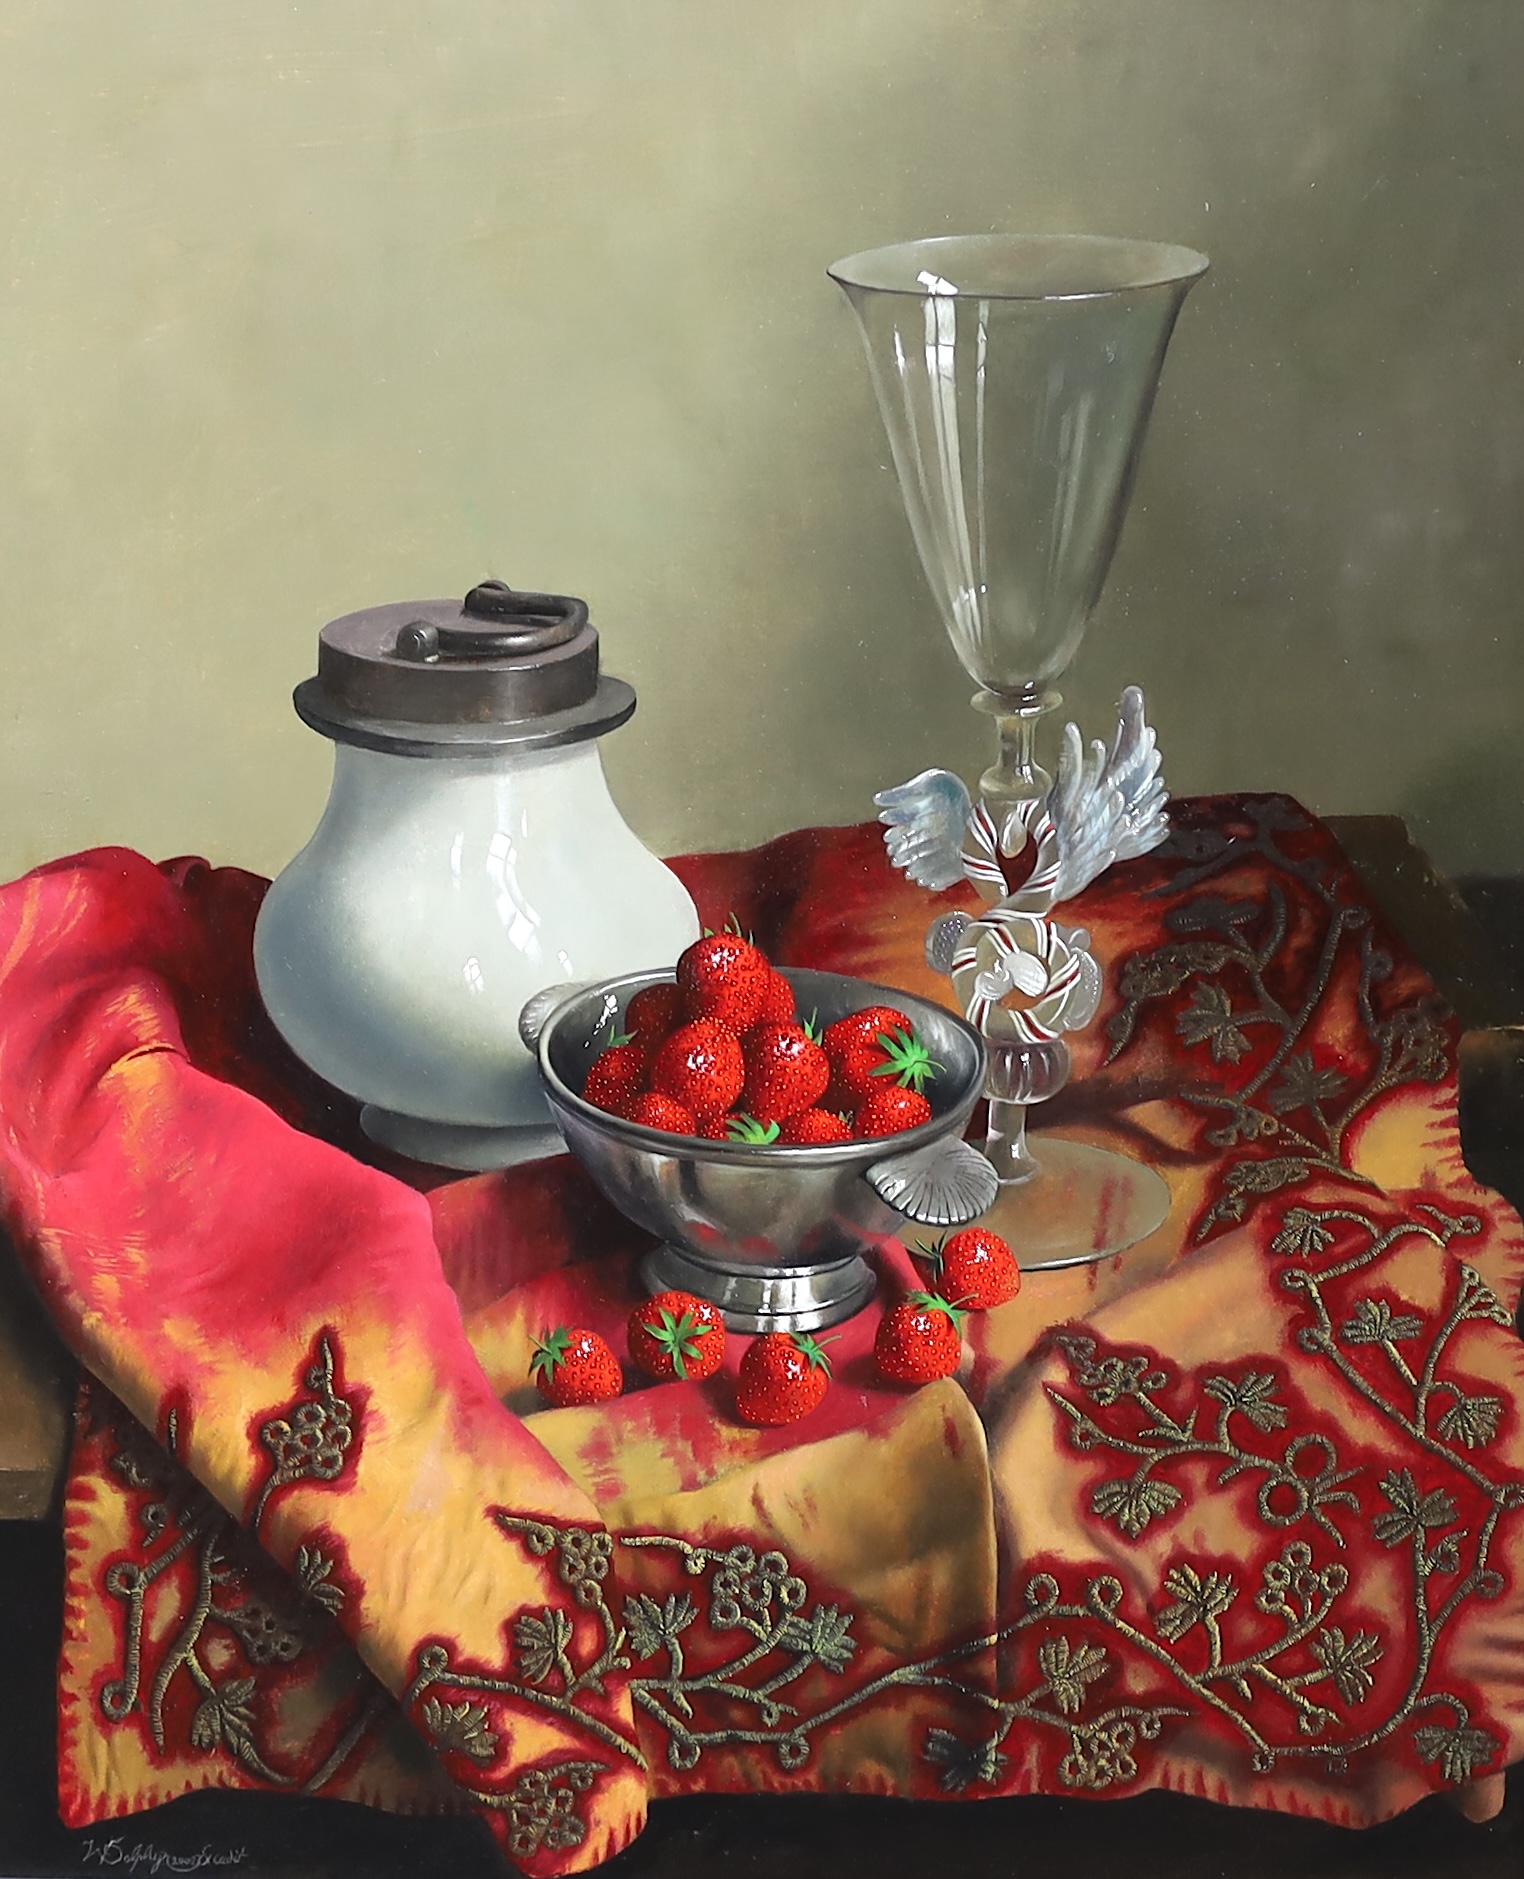 Willem Dolphyn (Belgian, 1935-2016), Still life of strawberries in a pewter bowl, a Venetian glass, a pewter mounted flagon and a bullion-work cloth, oil on panel, 59 x 49cm